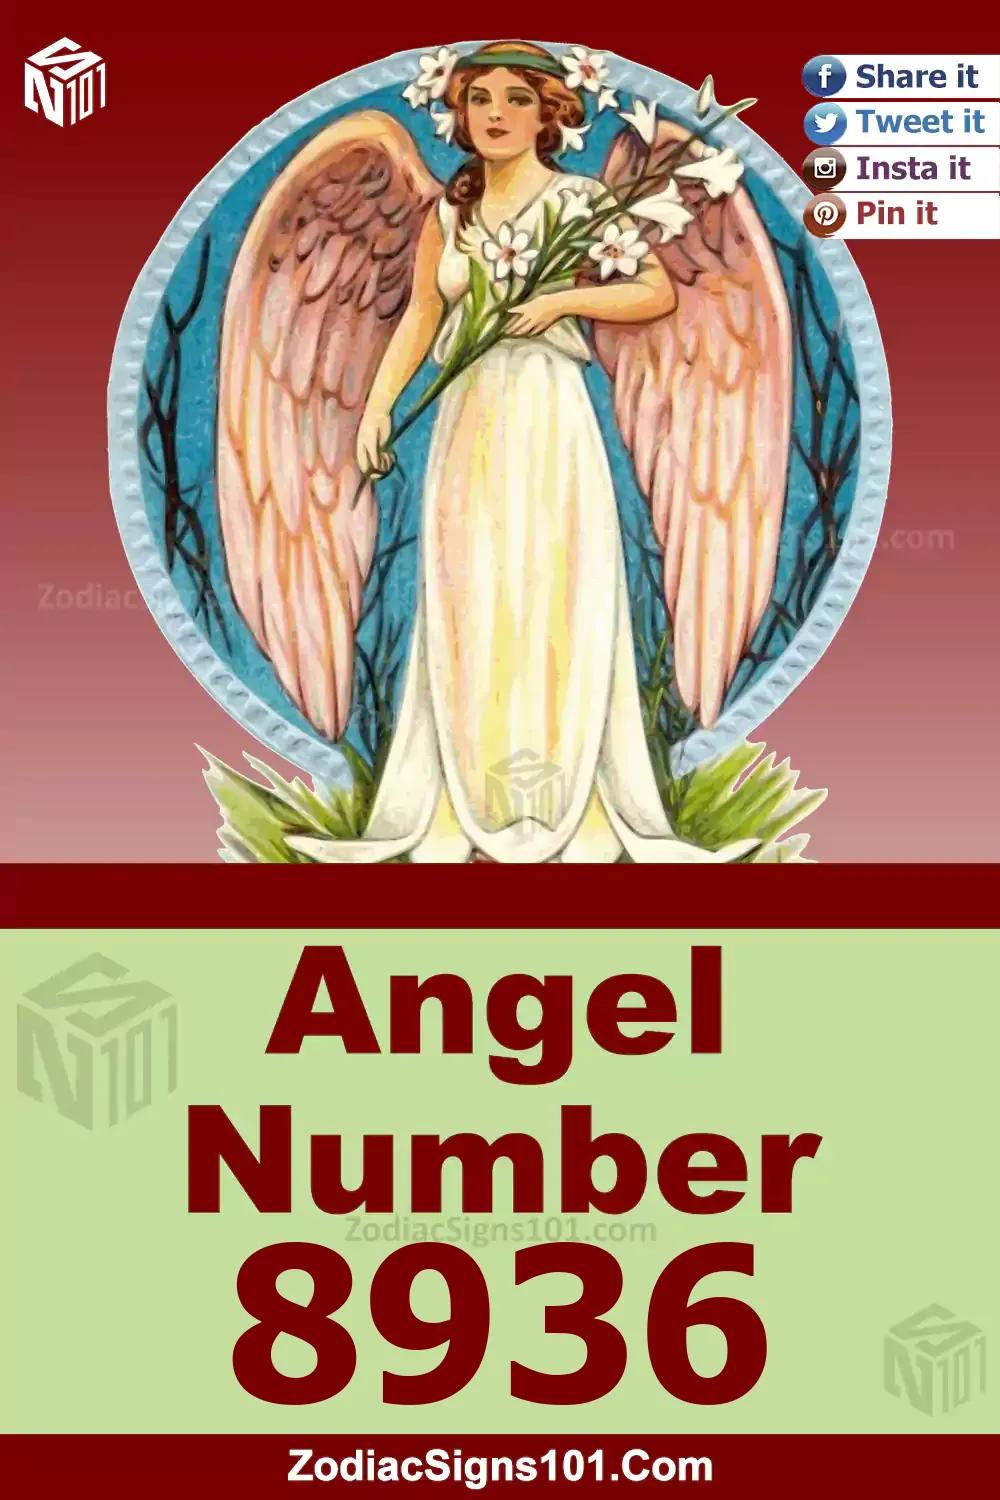 8936 Angel Number Meaning